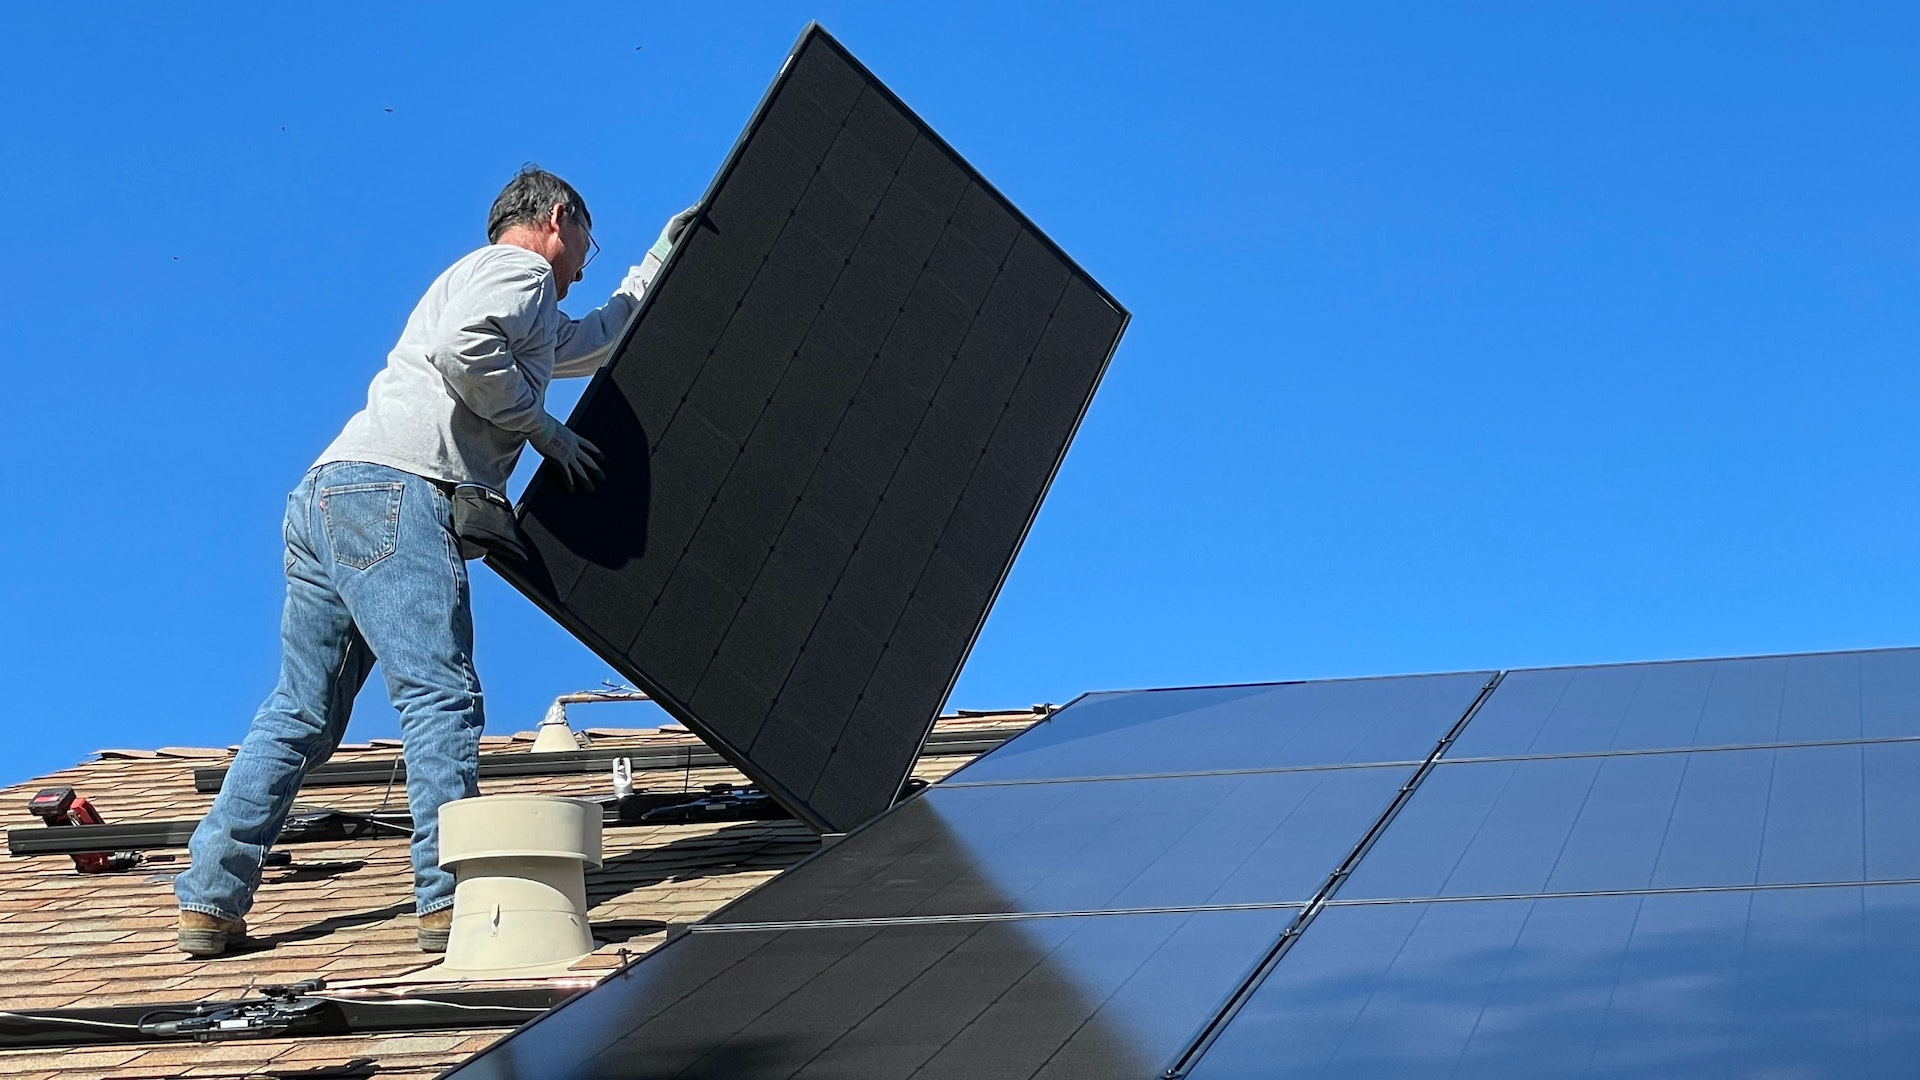 A man fits a solar panel on a roof. Up to 8,224 green jobs could be created in West Cumbria’s Copeland, where locals are objecting to controversial plans for a new coal mine